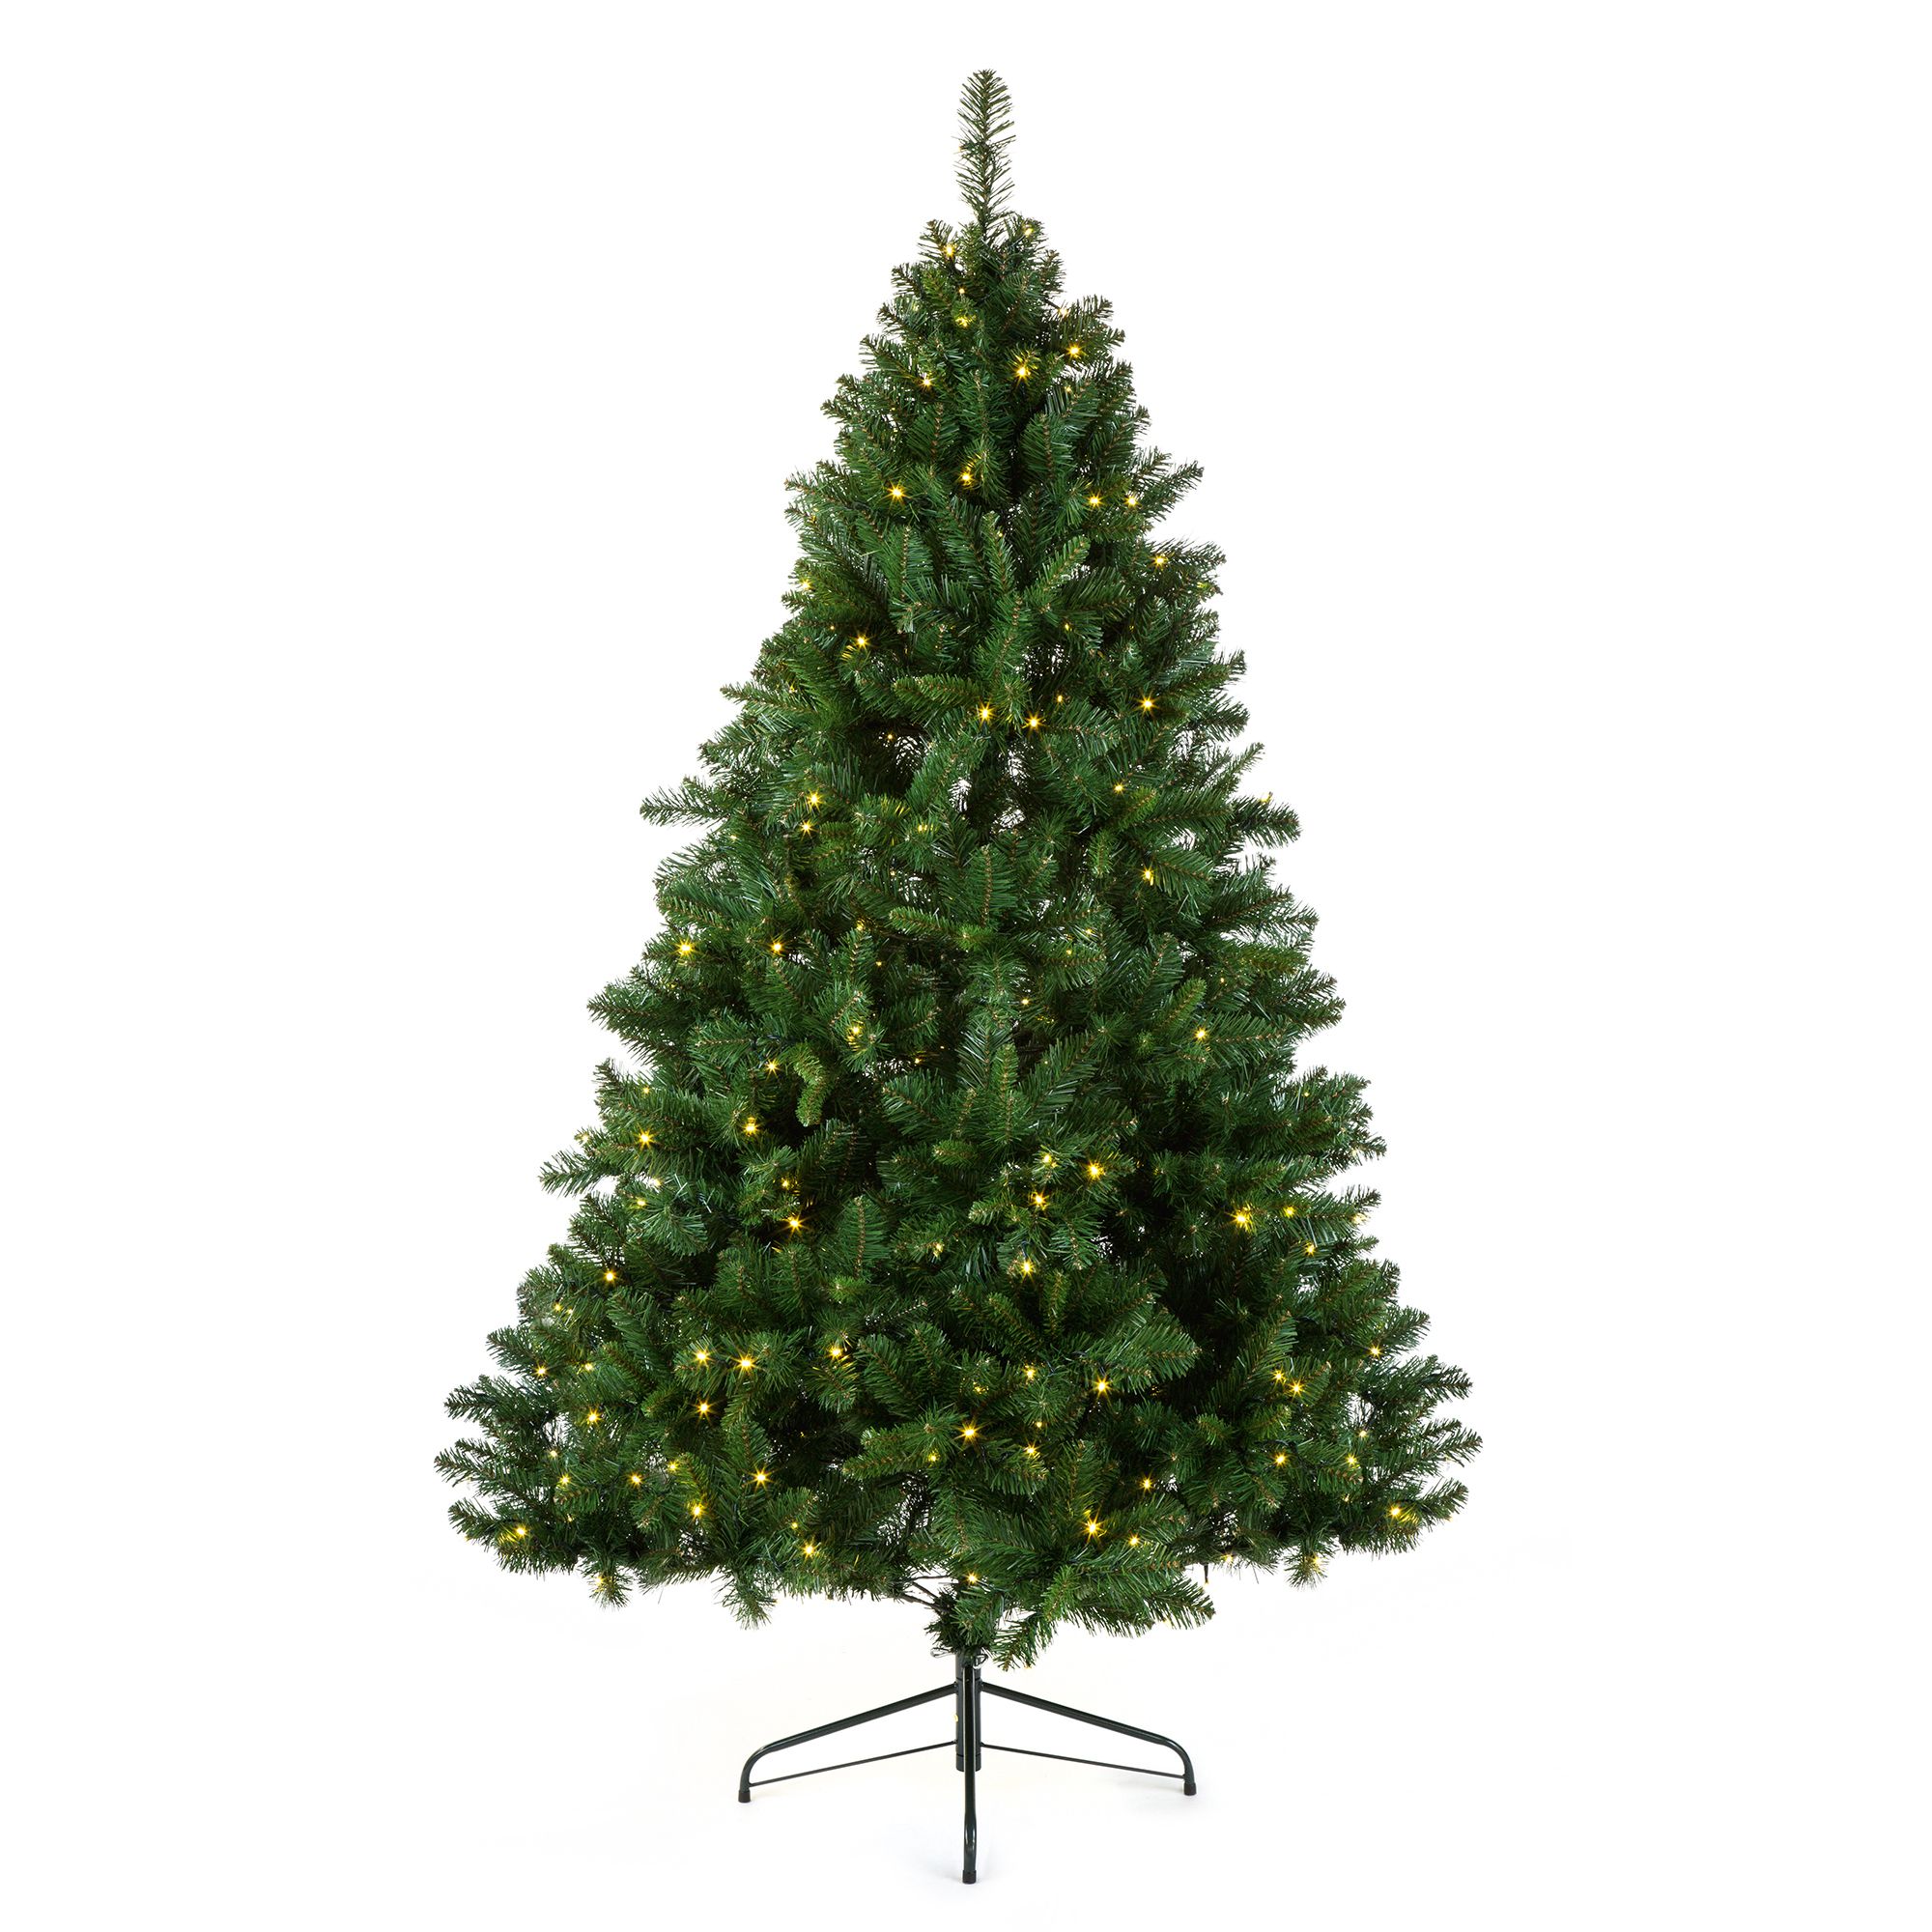 6ft 10in Oregon Pine Pre-lit artificial Christmas tree | Departments ...